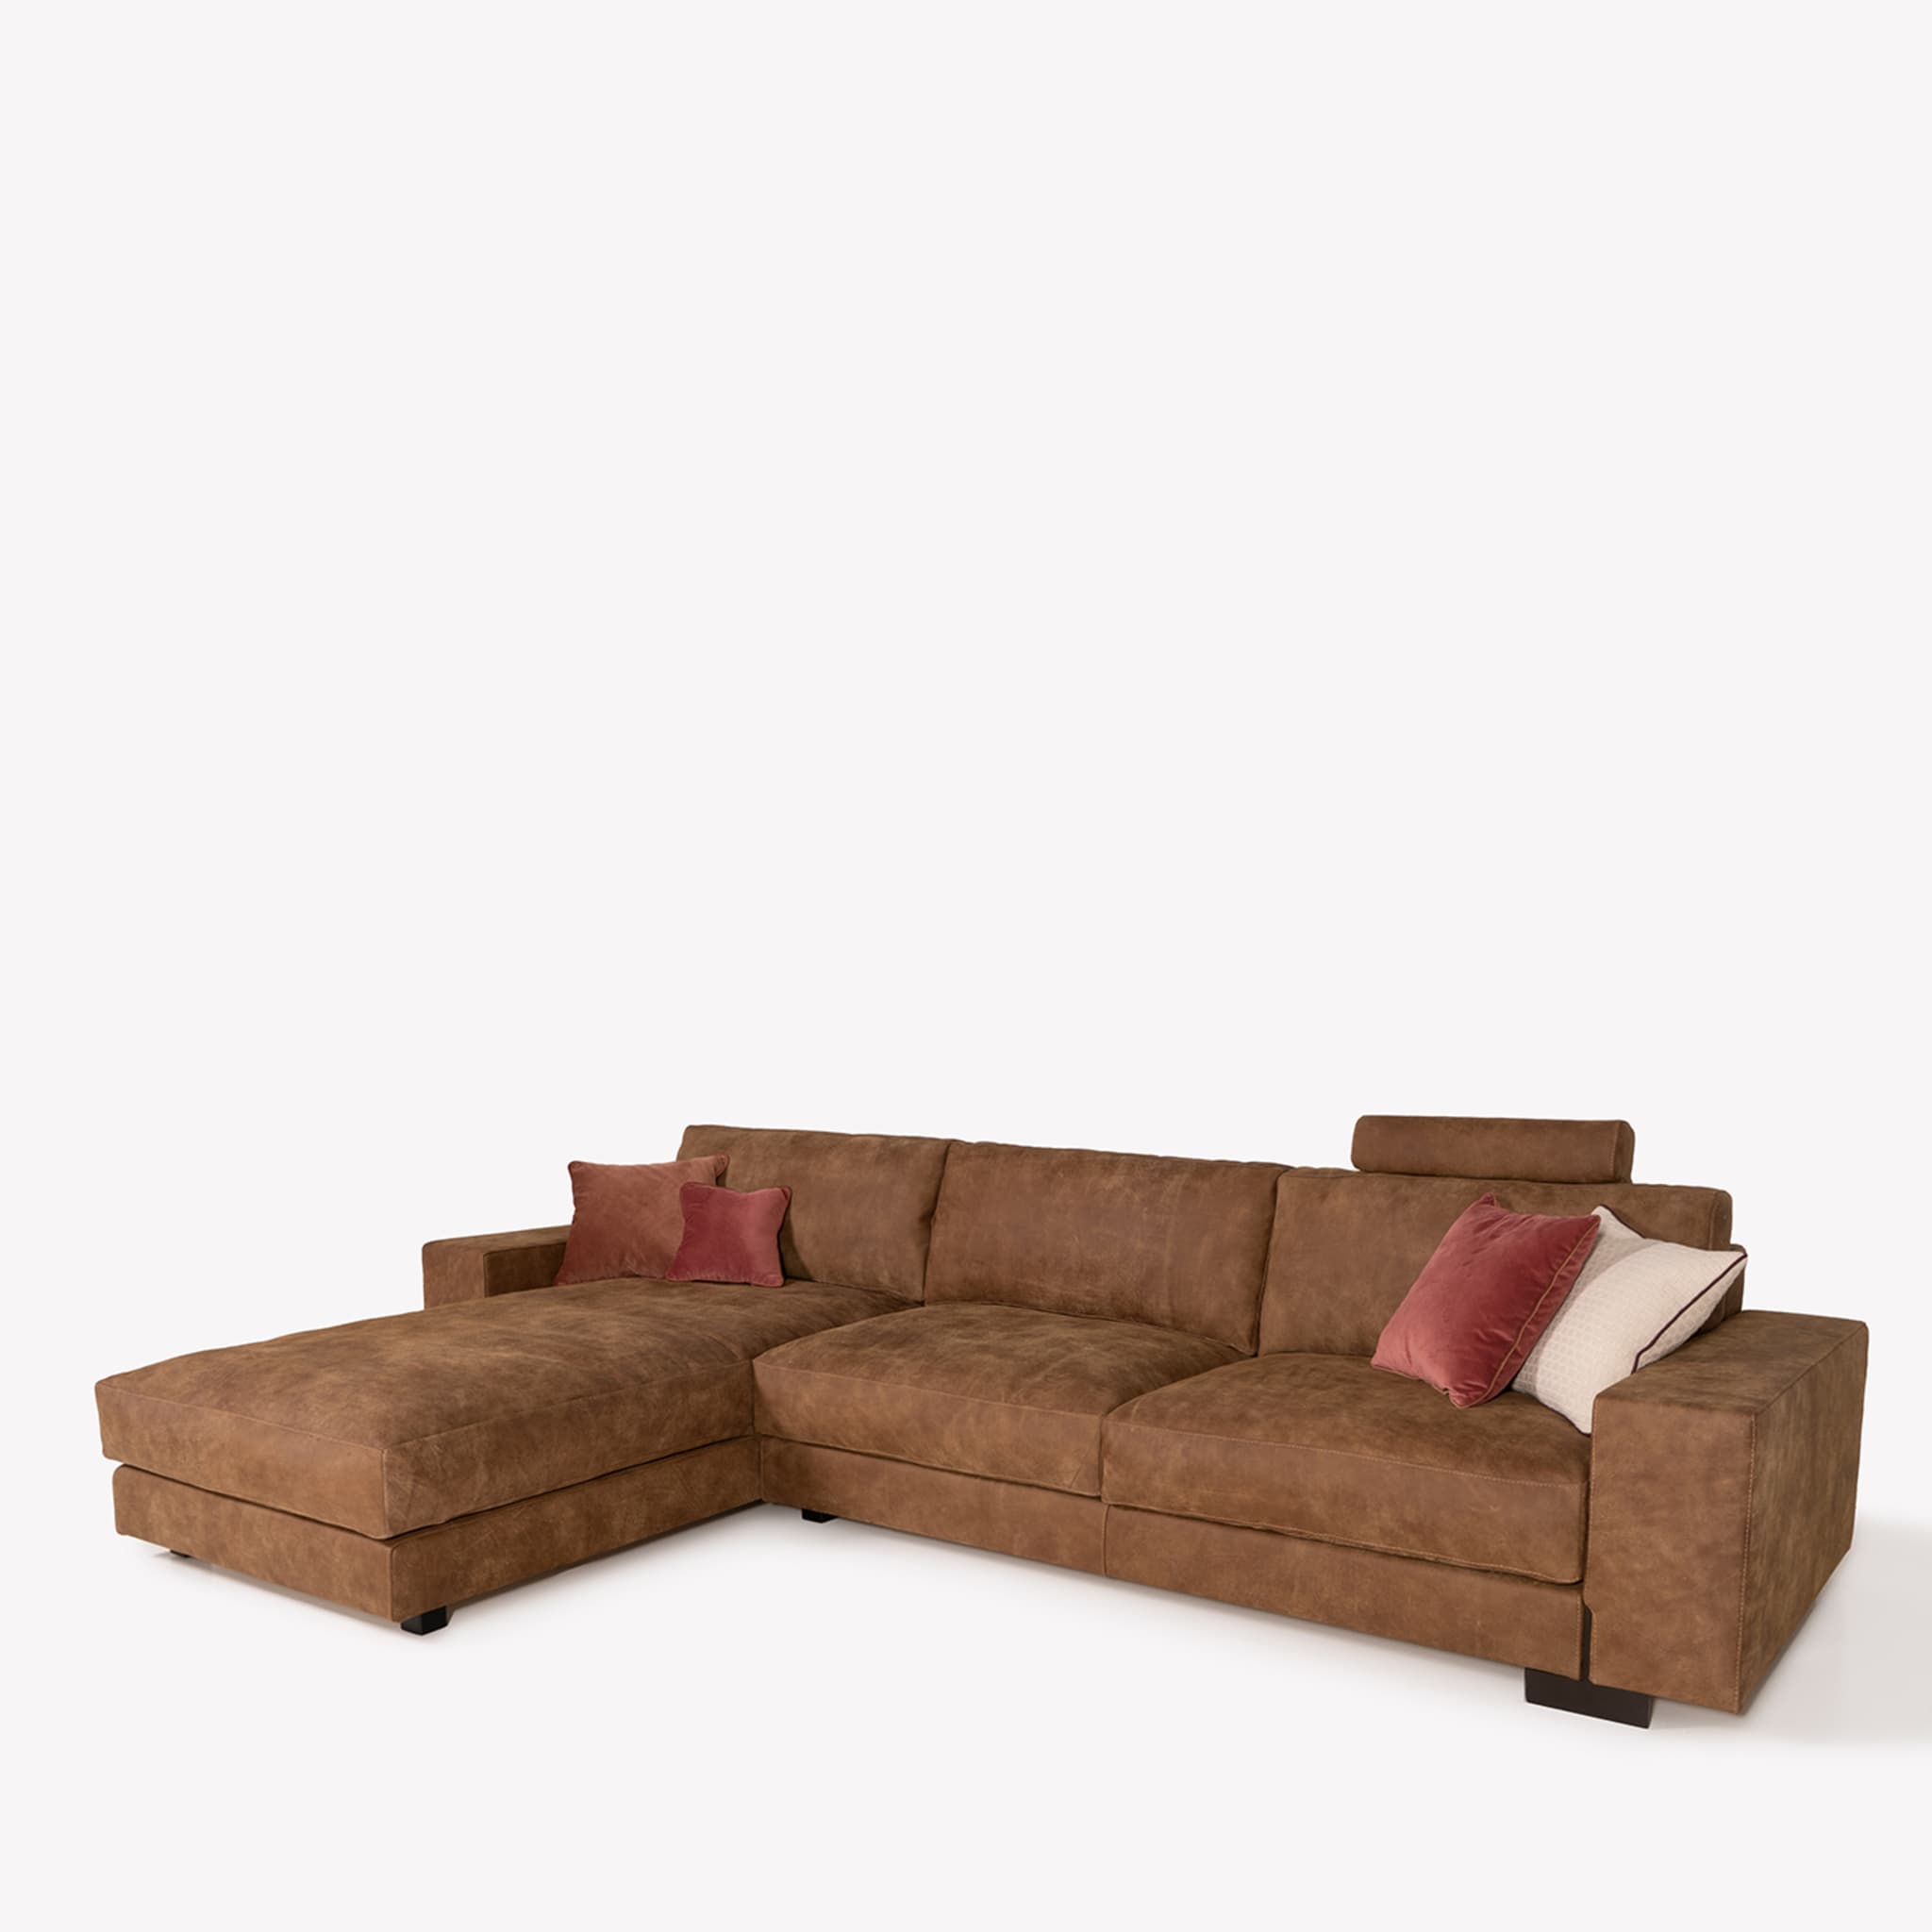 Glam 3-Seater Sofa Chaise Longue by Marco and Giulio Mantellassi - Alternative view 1